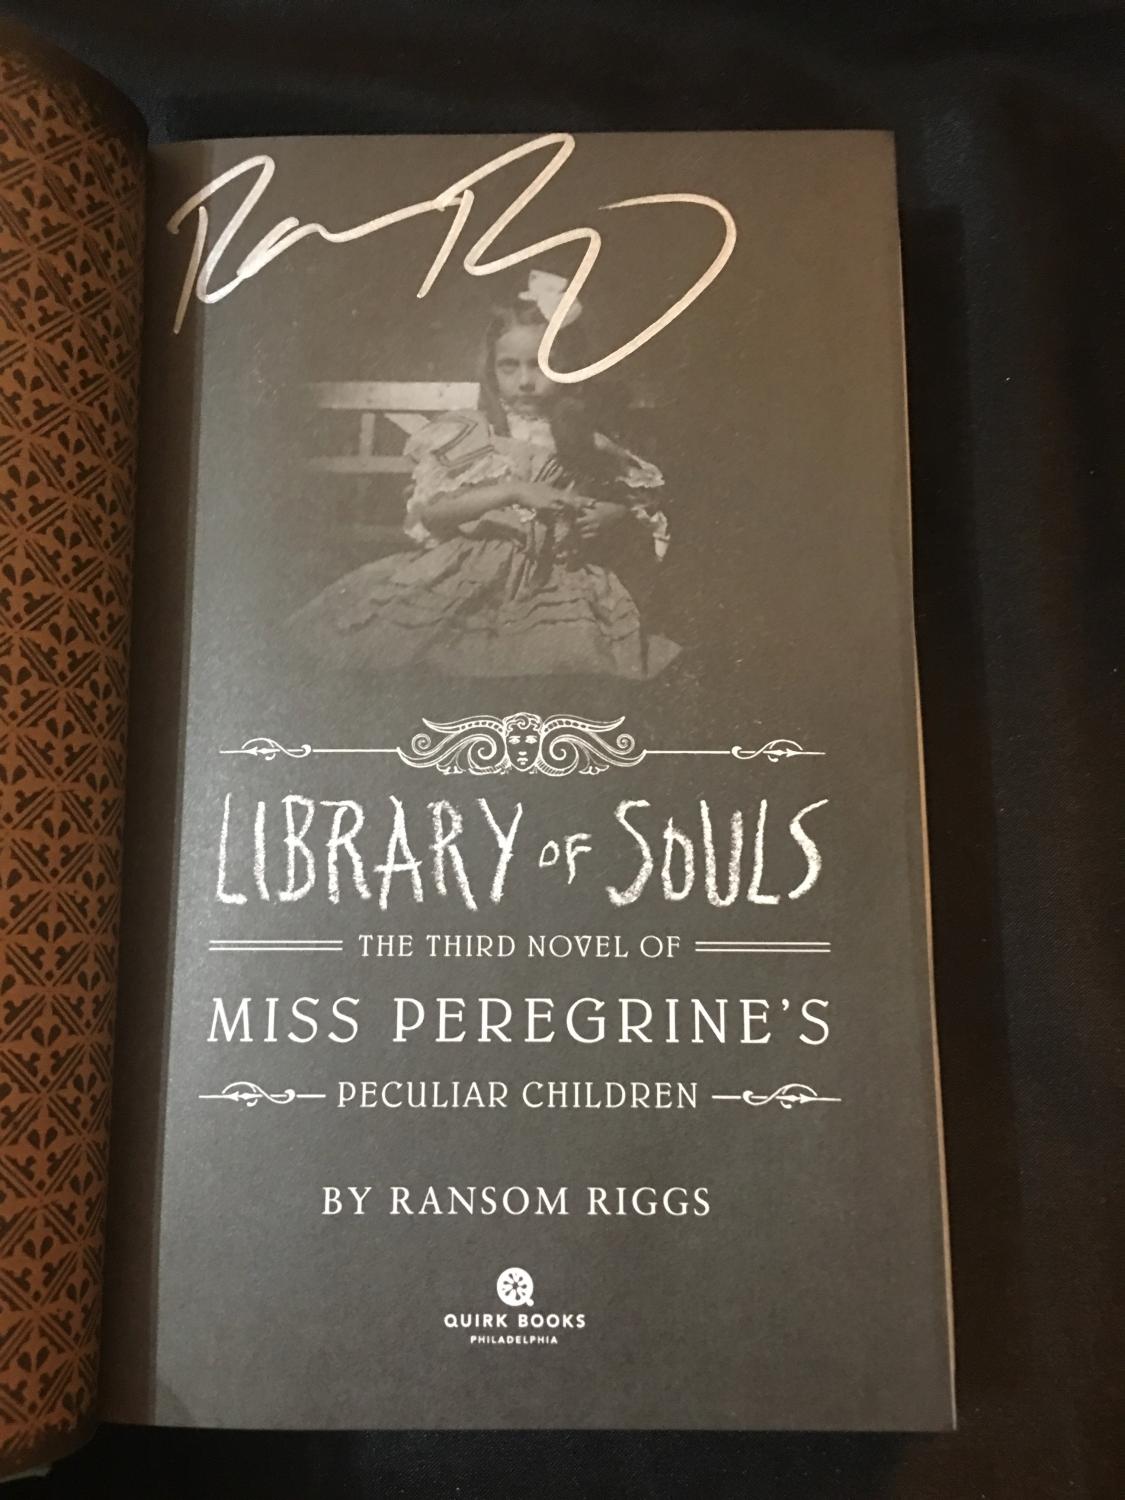 Very　Souls:　of　(2015)　Edition　Good　The　Riggs:　Miss　Author(s)　de　First　Peculiar　Third　Novel　Peregrine's　of　Library　Signed　First　Hardcover　1st　Children　by　Print　Ransom　Edition,